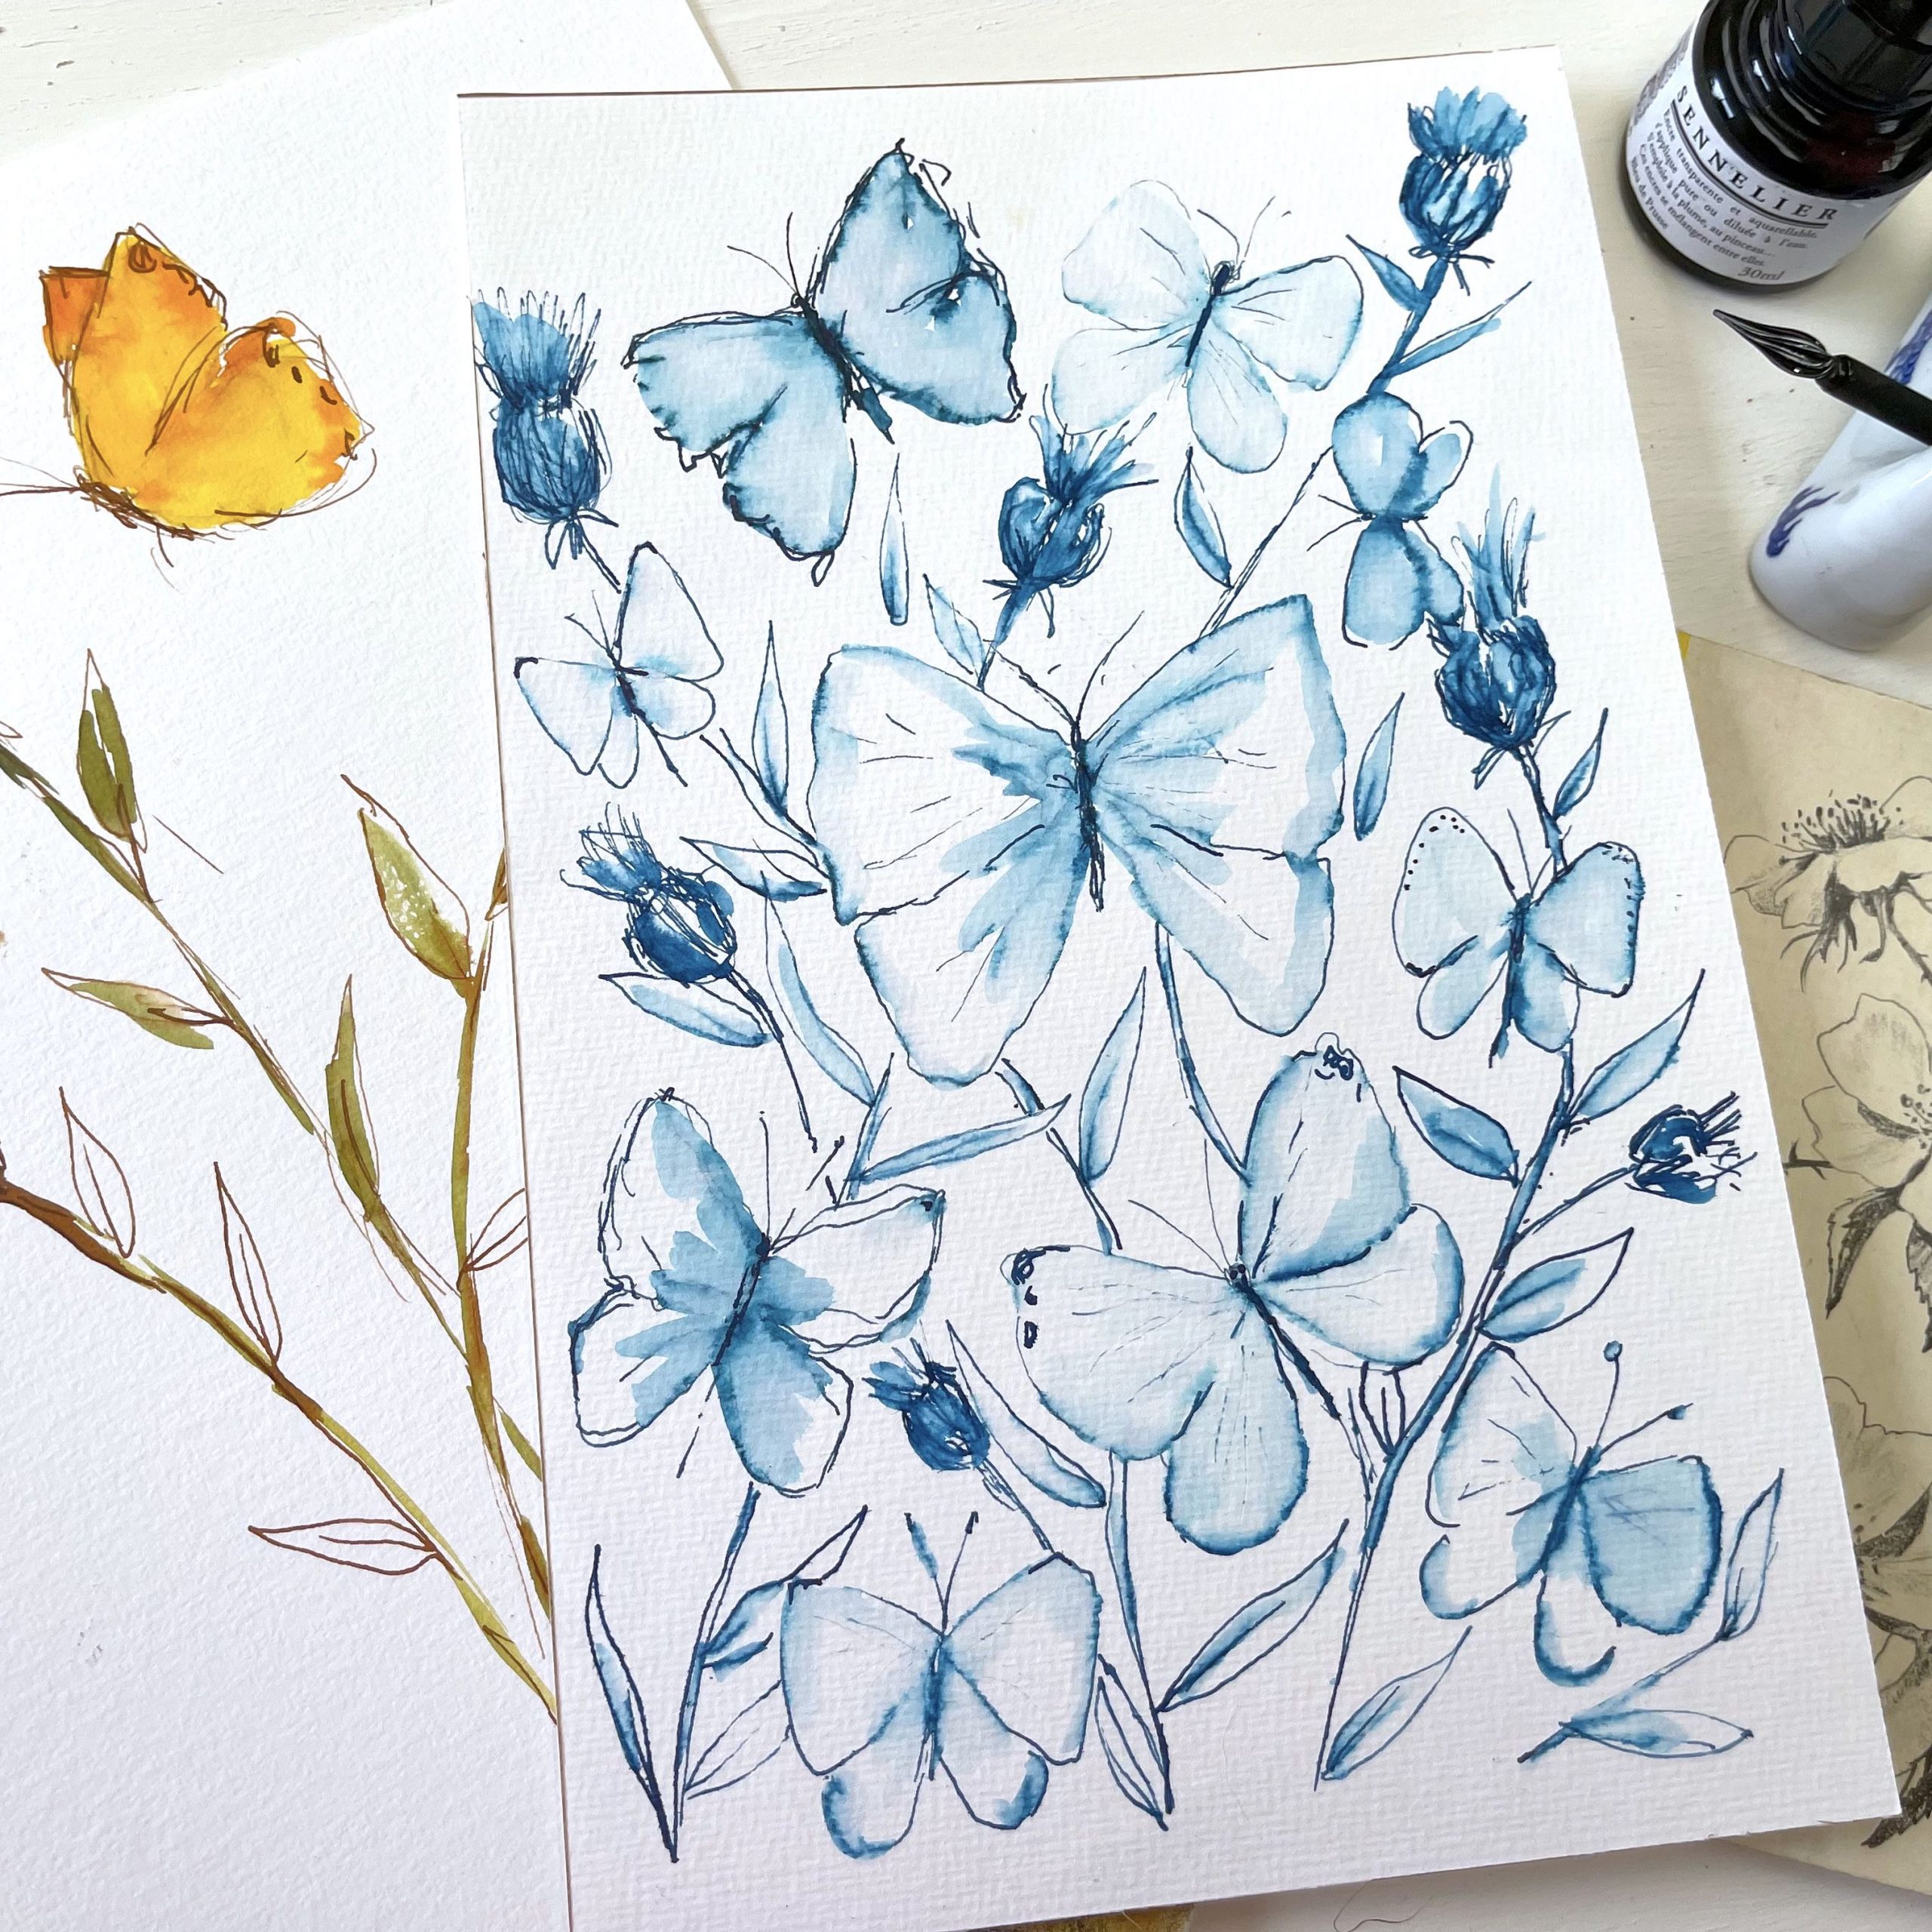 Watercolor painting of blue butterflies with sennelier ink and glass pen